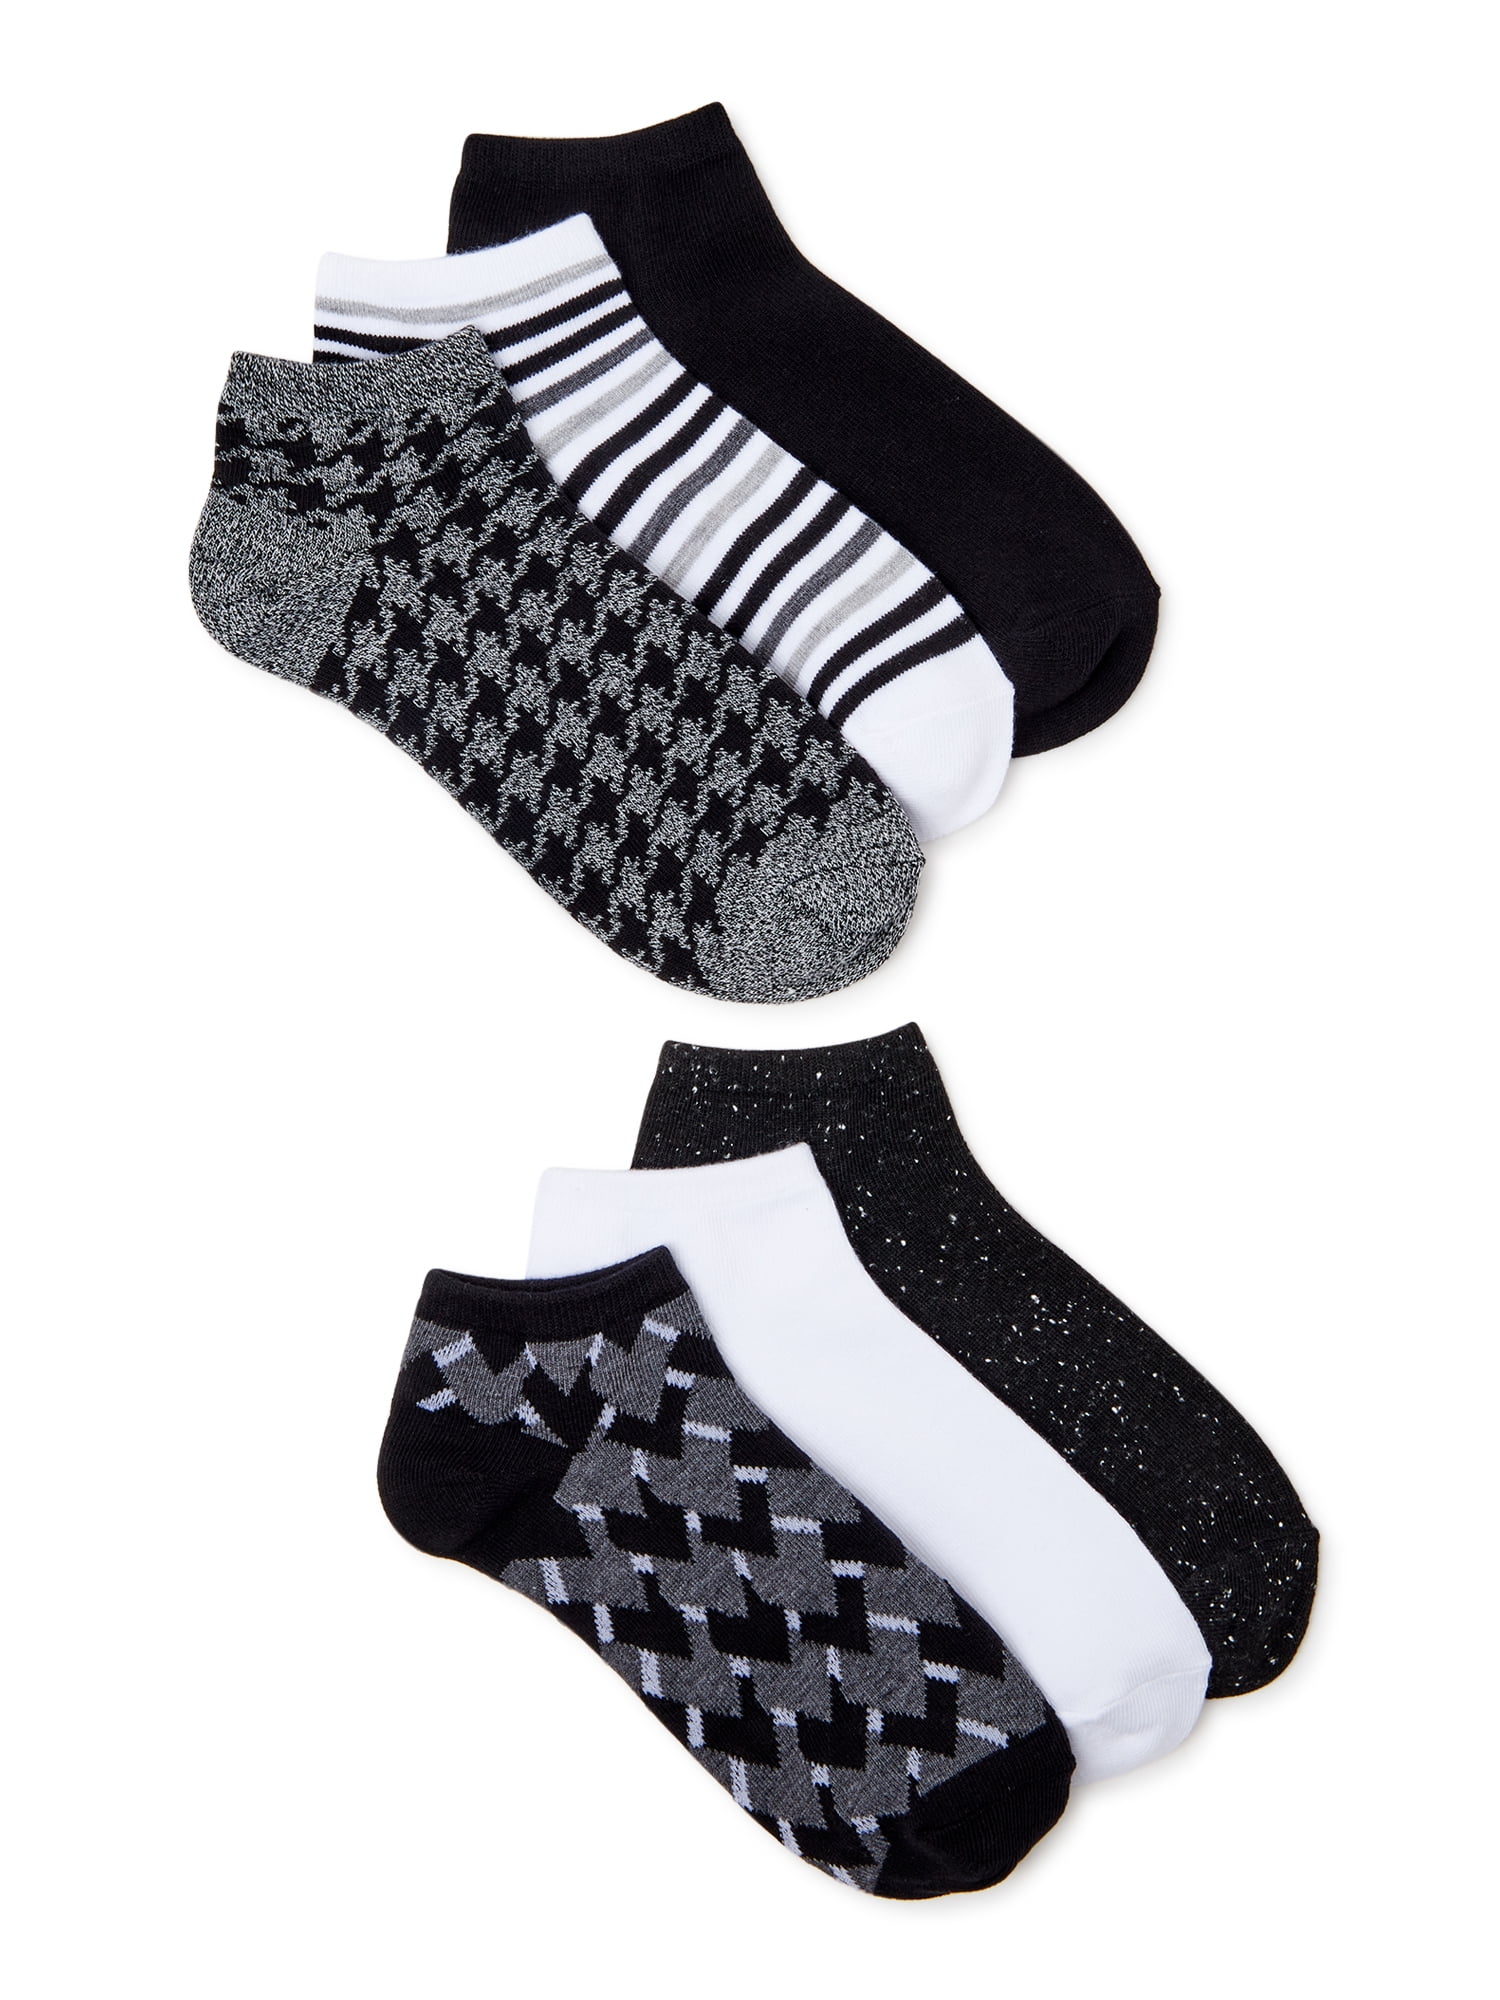 5 Pairs Adult Women Lady Casual Sports Heart-shaped Ankle Low Cute Cotton Socks 